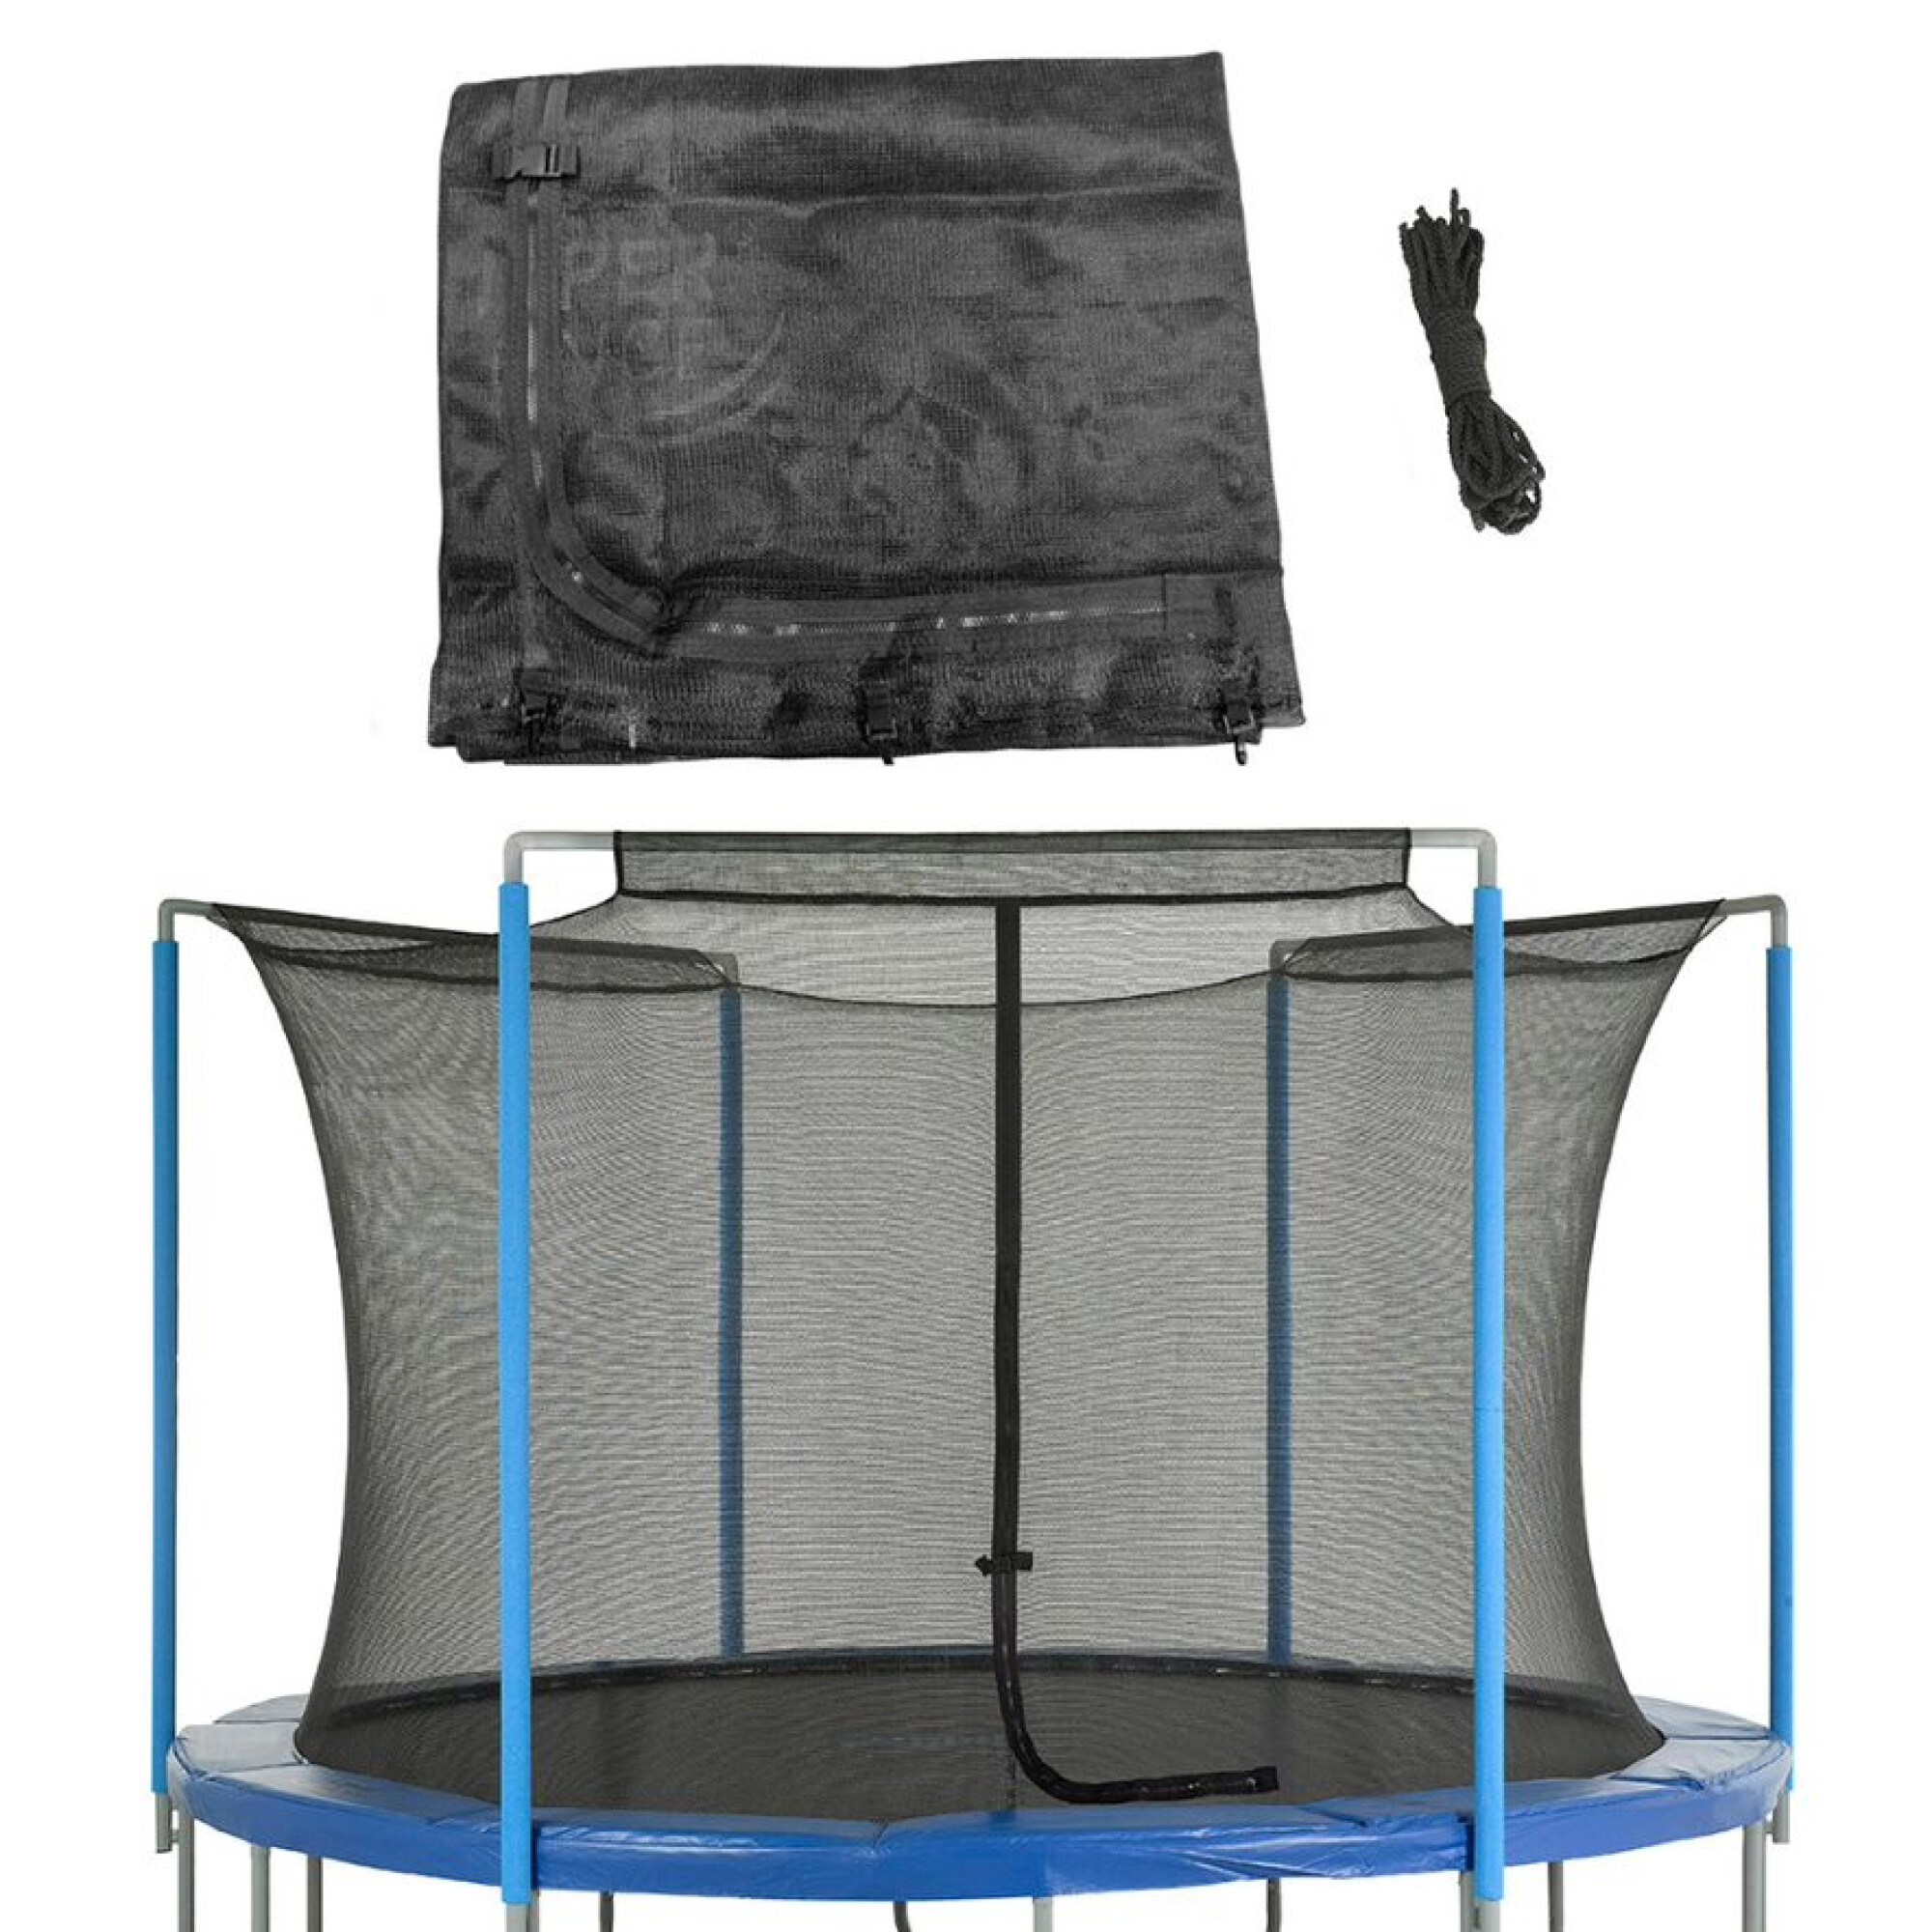 UpperBounce Black Trampoline Safety Enclosure in the Trampoline Accessories department at Lowes.com